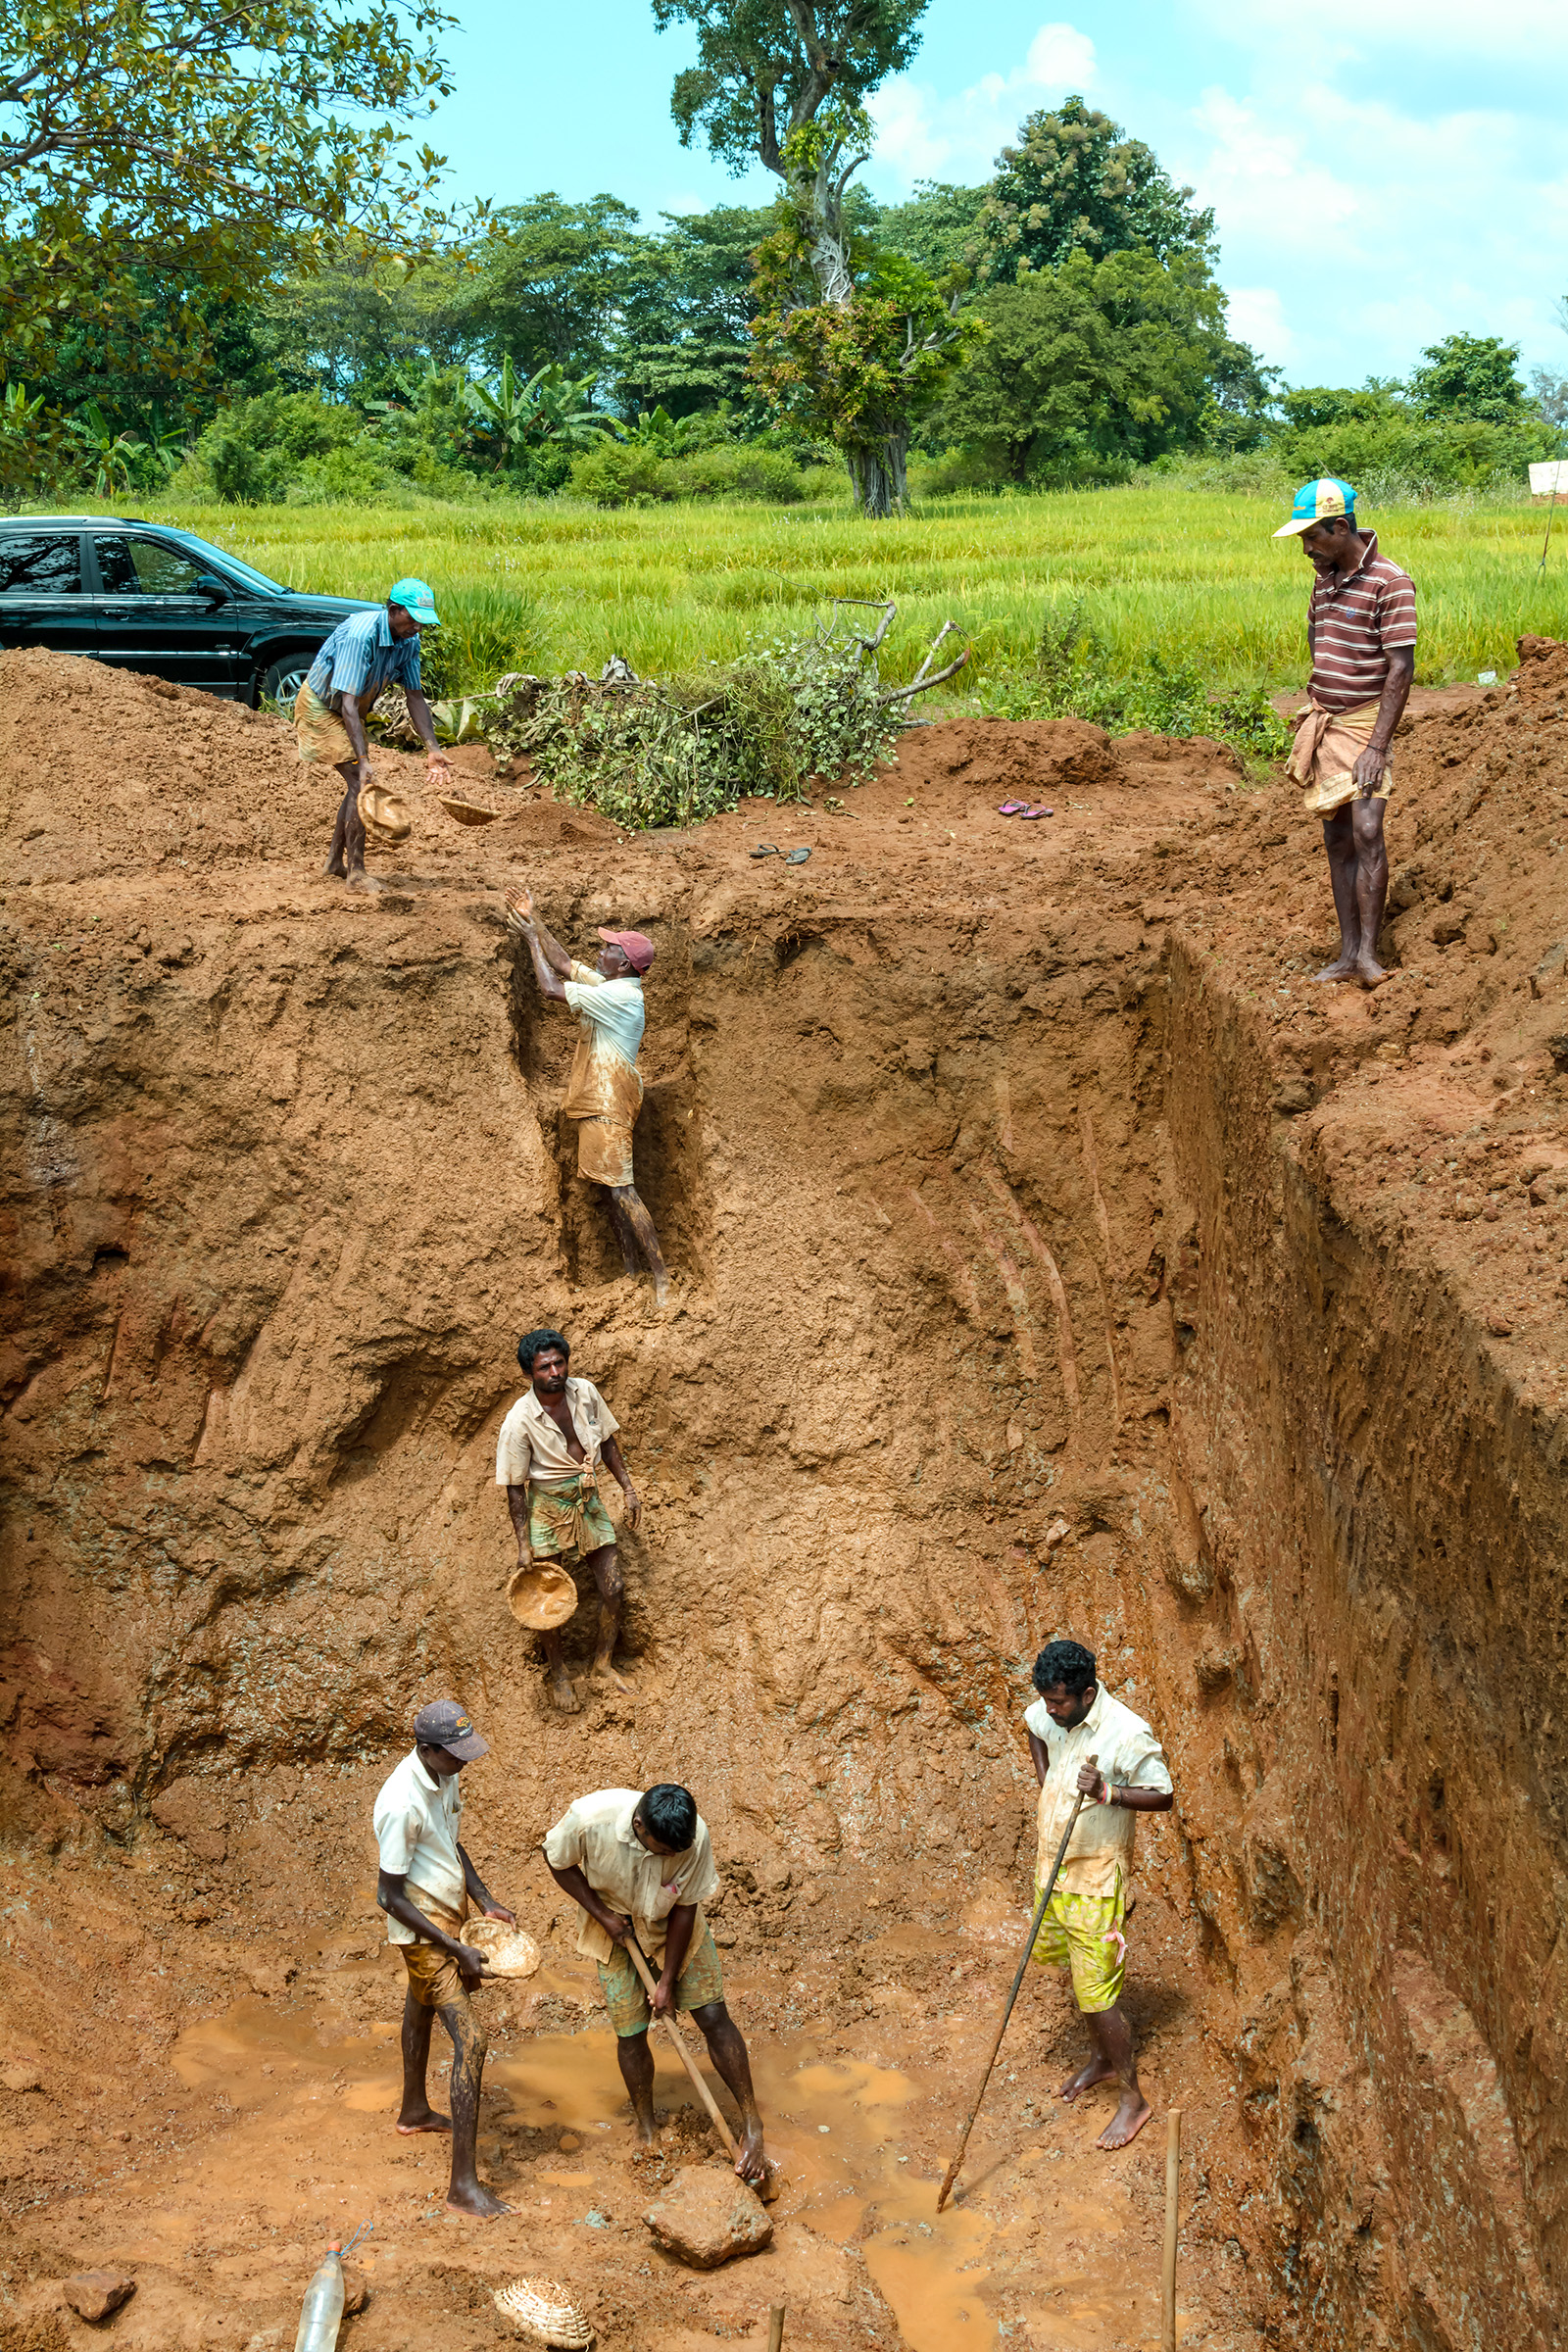 Most of the gemstone mining in Sri Lanka is pit mining using hand-powered techniques. At this larger pit, miners toss the gravel up in baskets.